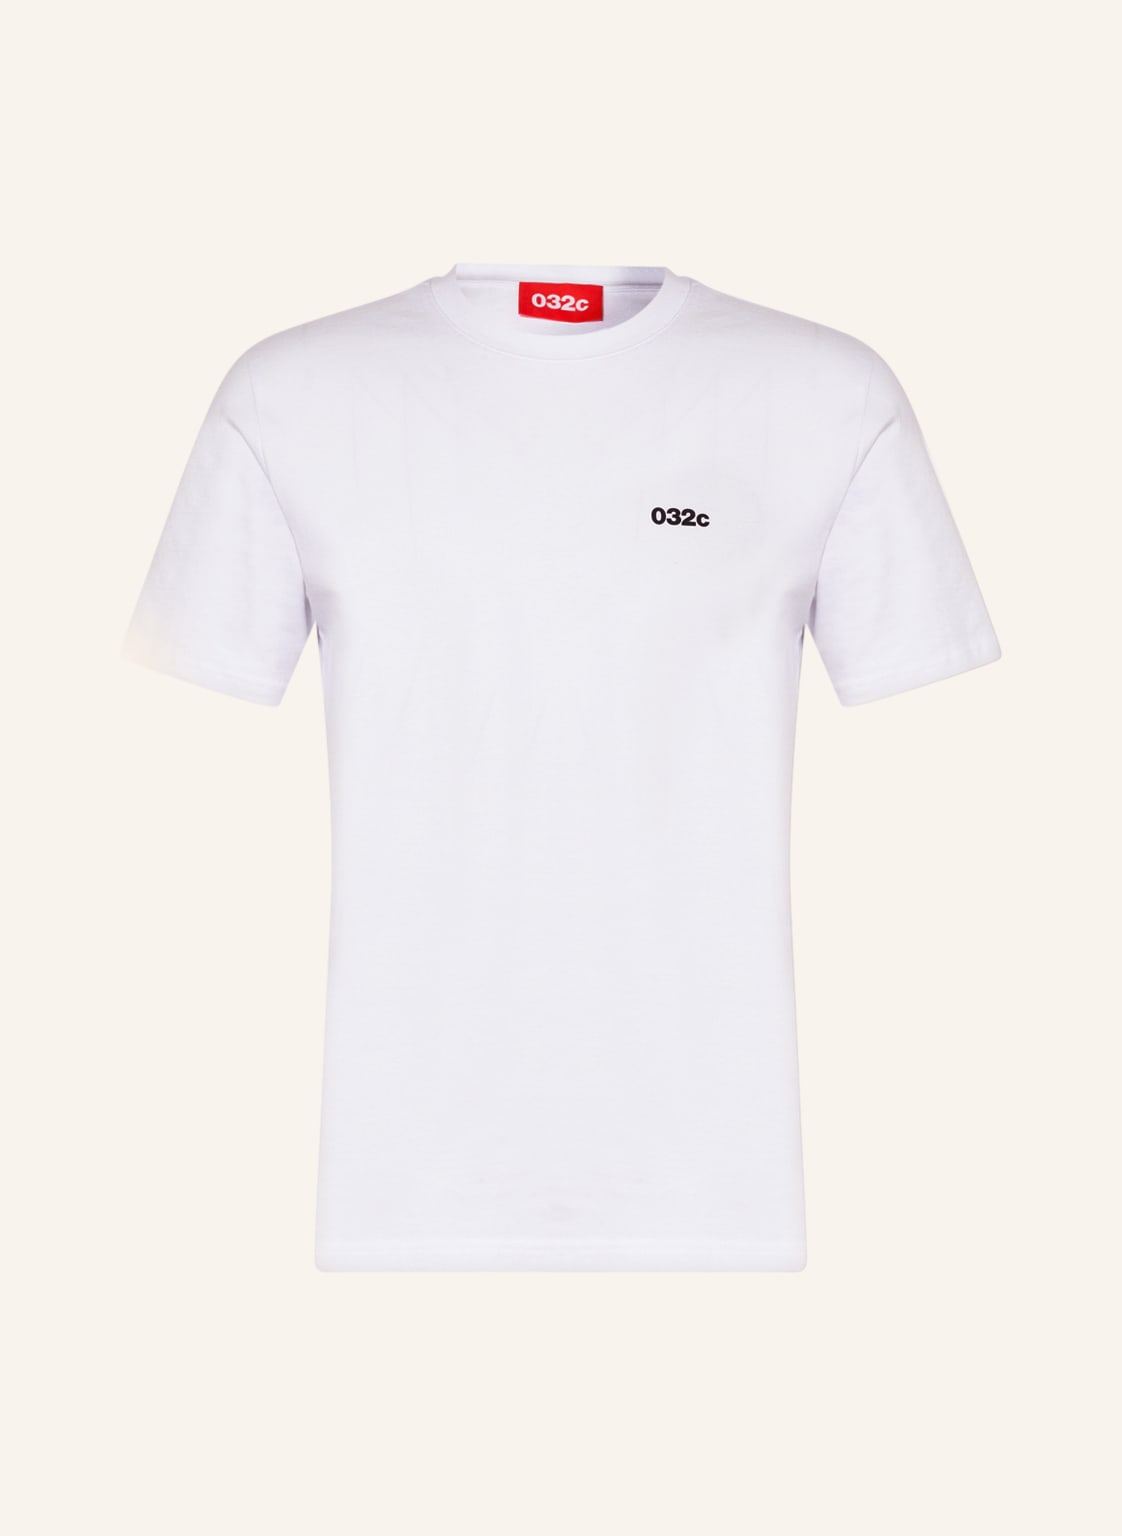 Image of 032c T-Shirt weiss